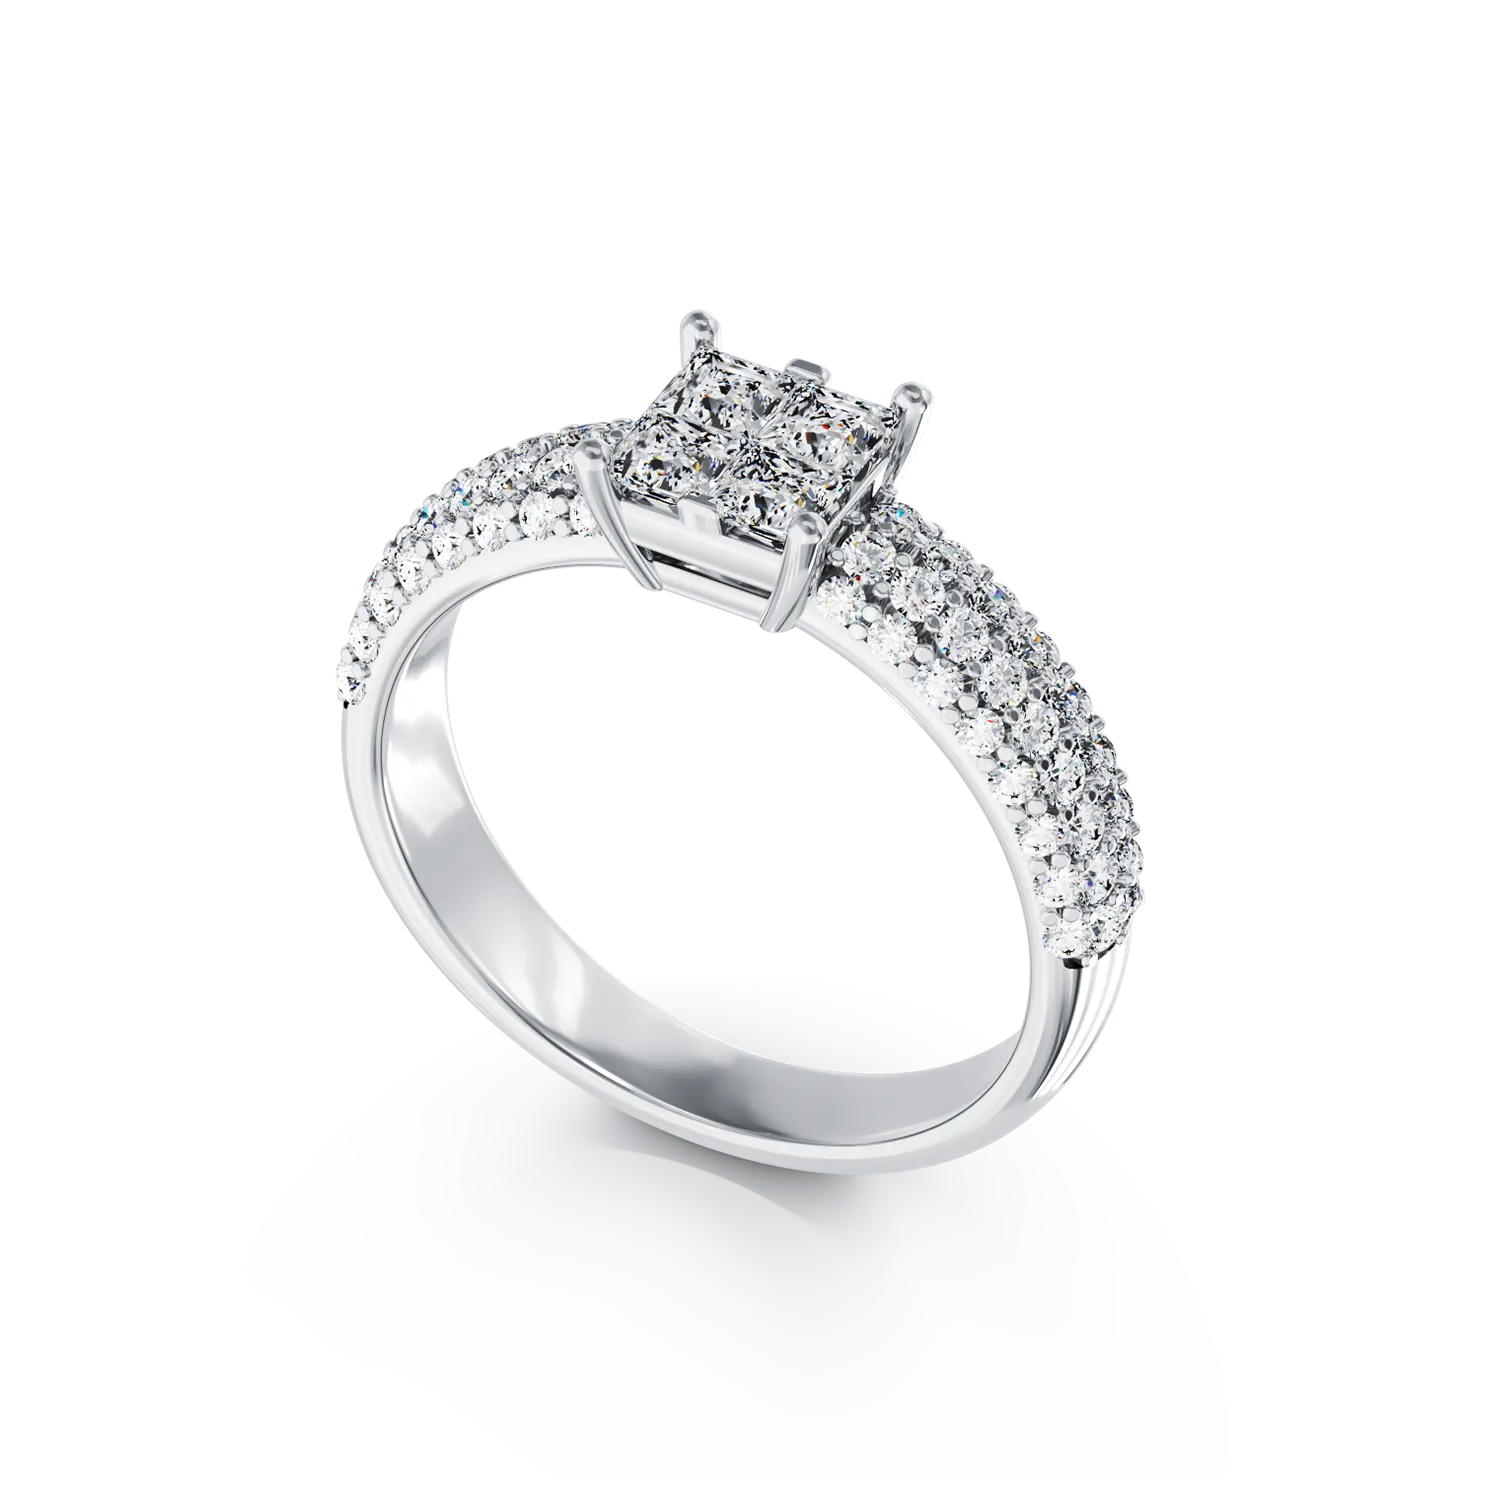 18K white gold engagement ring with 0.98ct diamonds